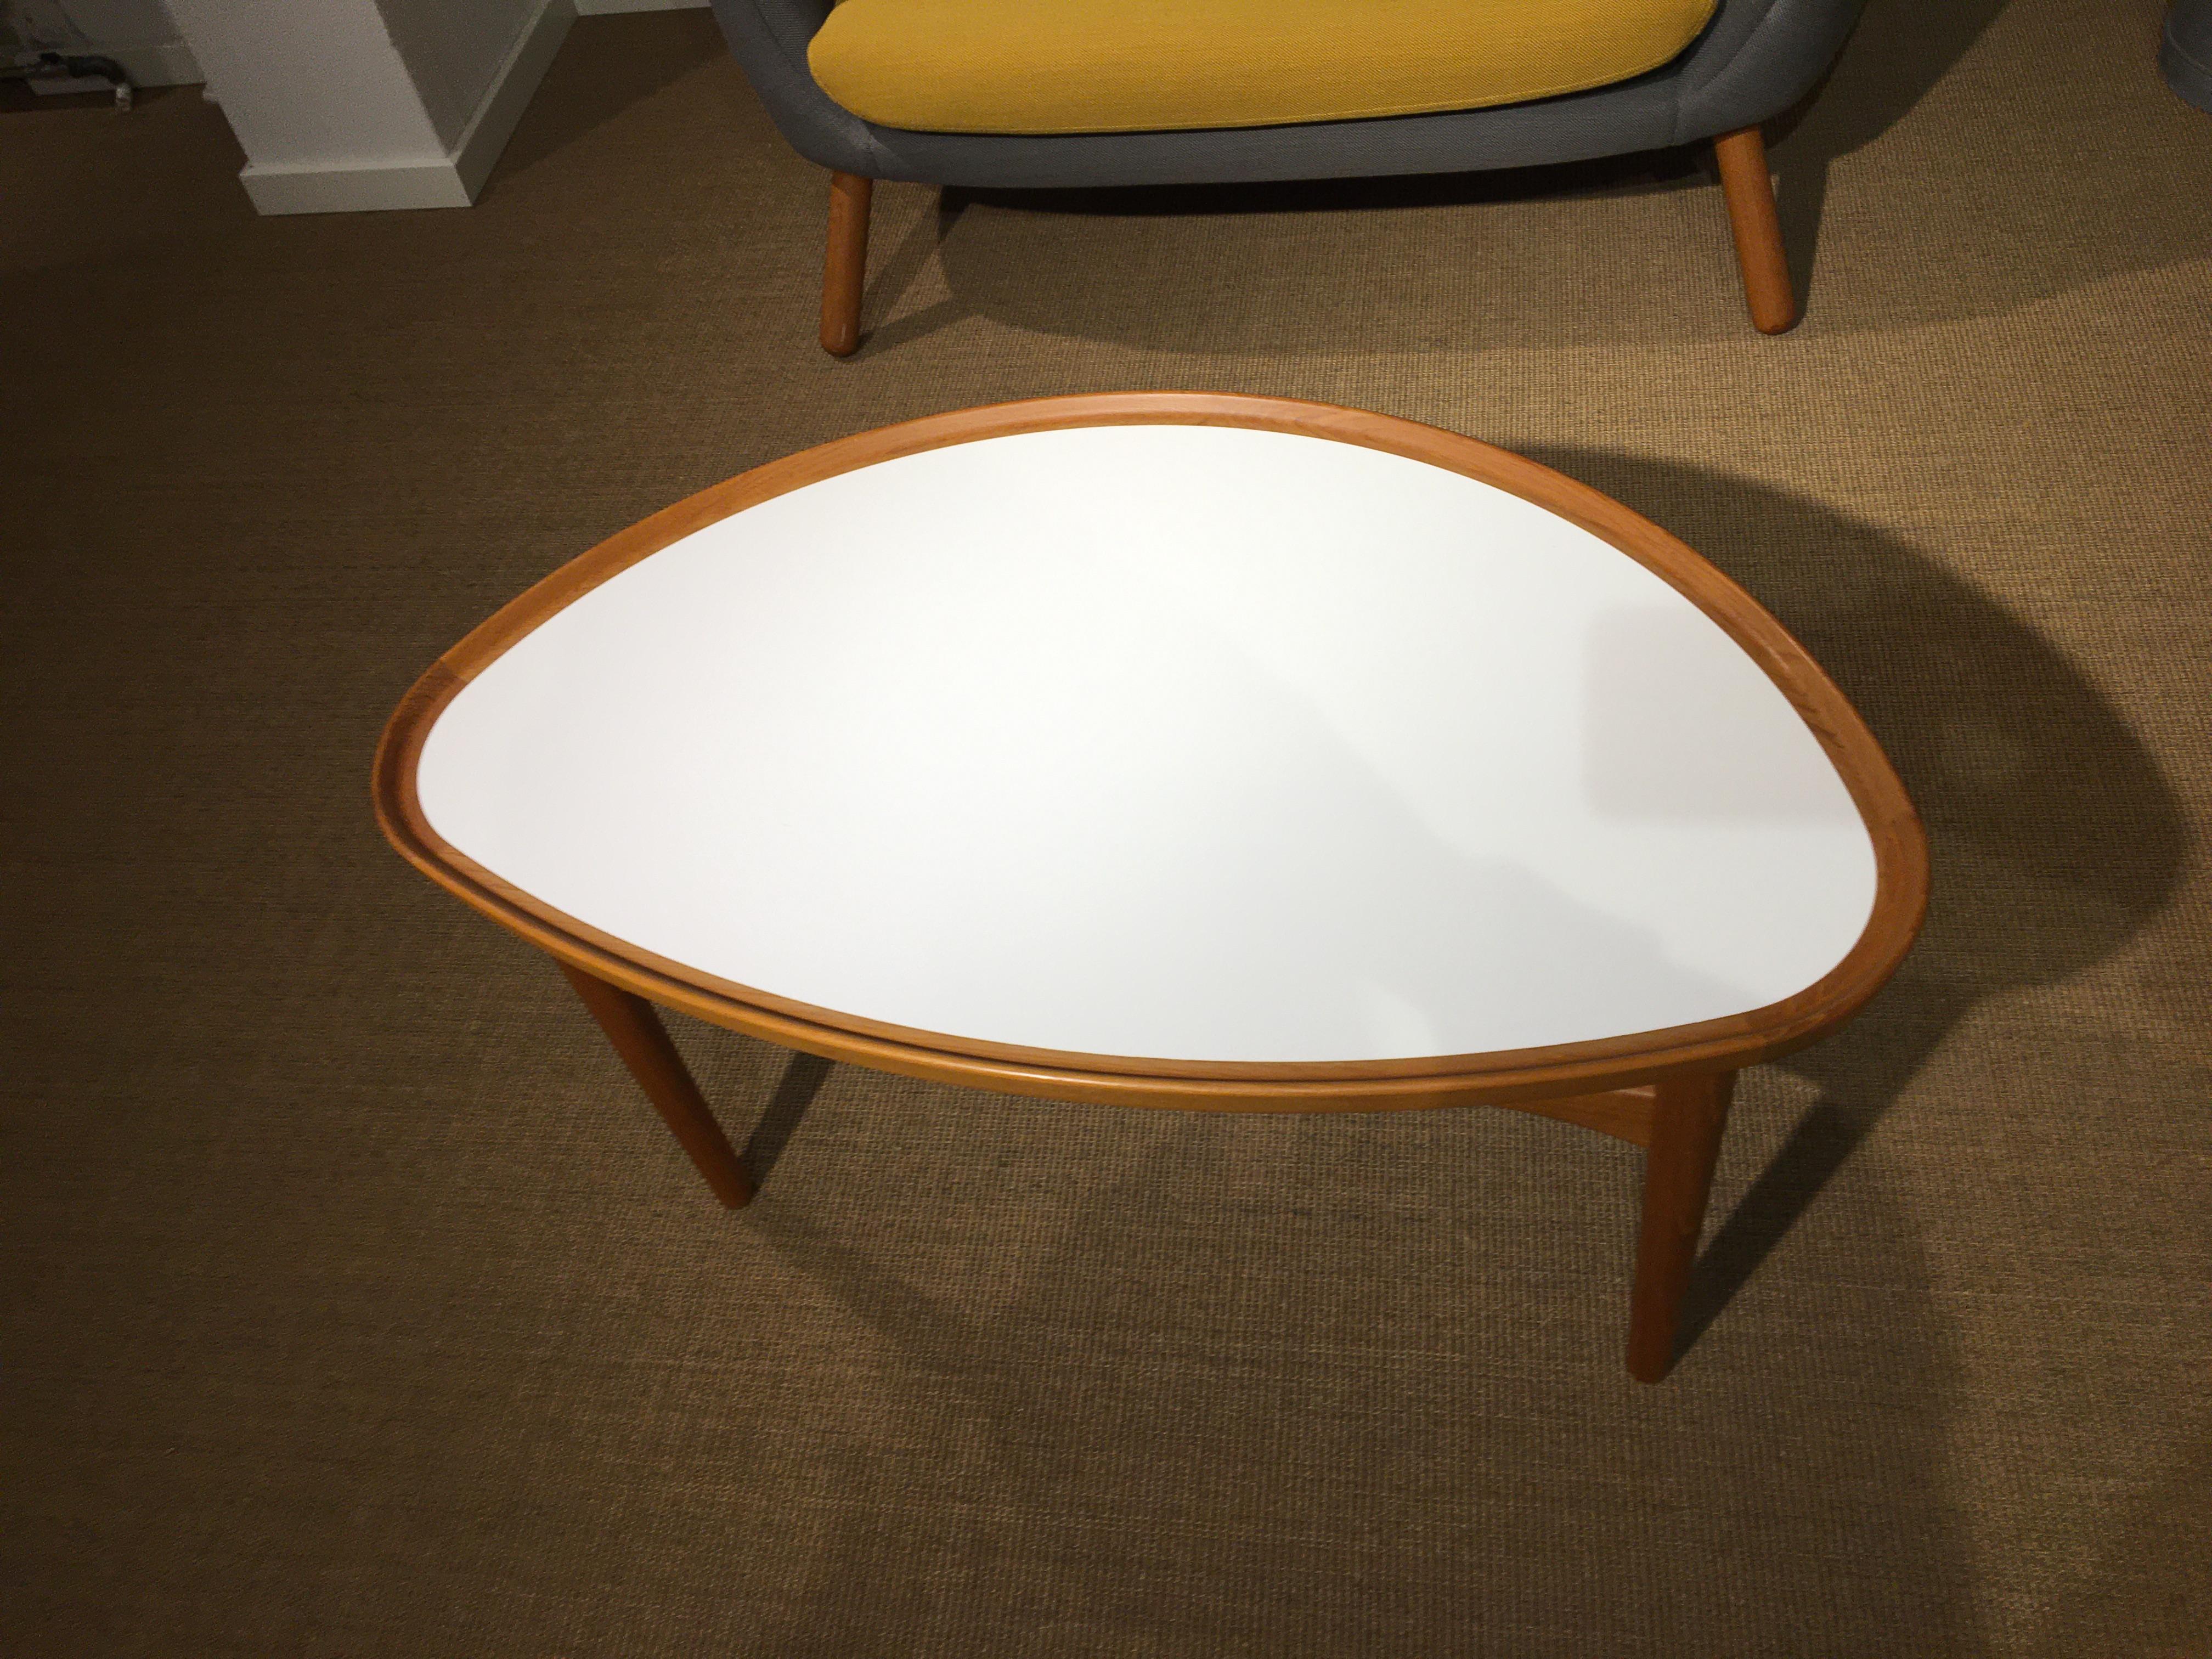 Coffee table FJ4850 'Eye Table' designed by Finn Juhl in 1948.
White high gloss laminate plate with massive rounded kehlet edges, coffins and legs in walnut.
The table was produced at Onecollection in 2011.
Dimensions: L 90 cm, W 56 cm.